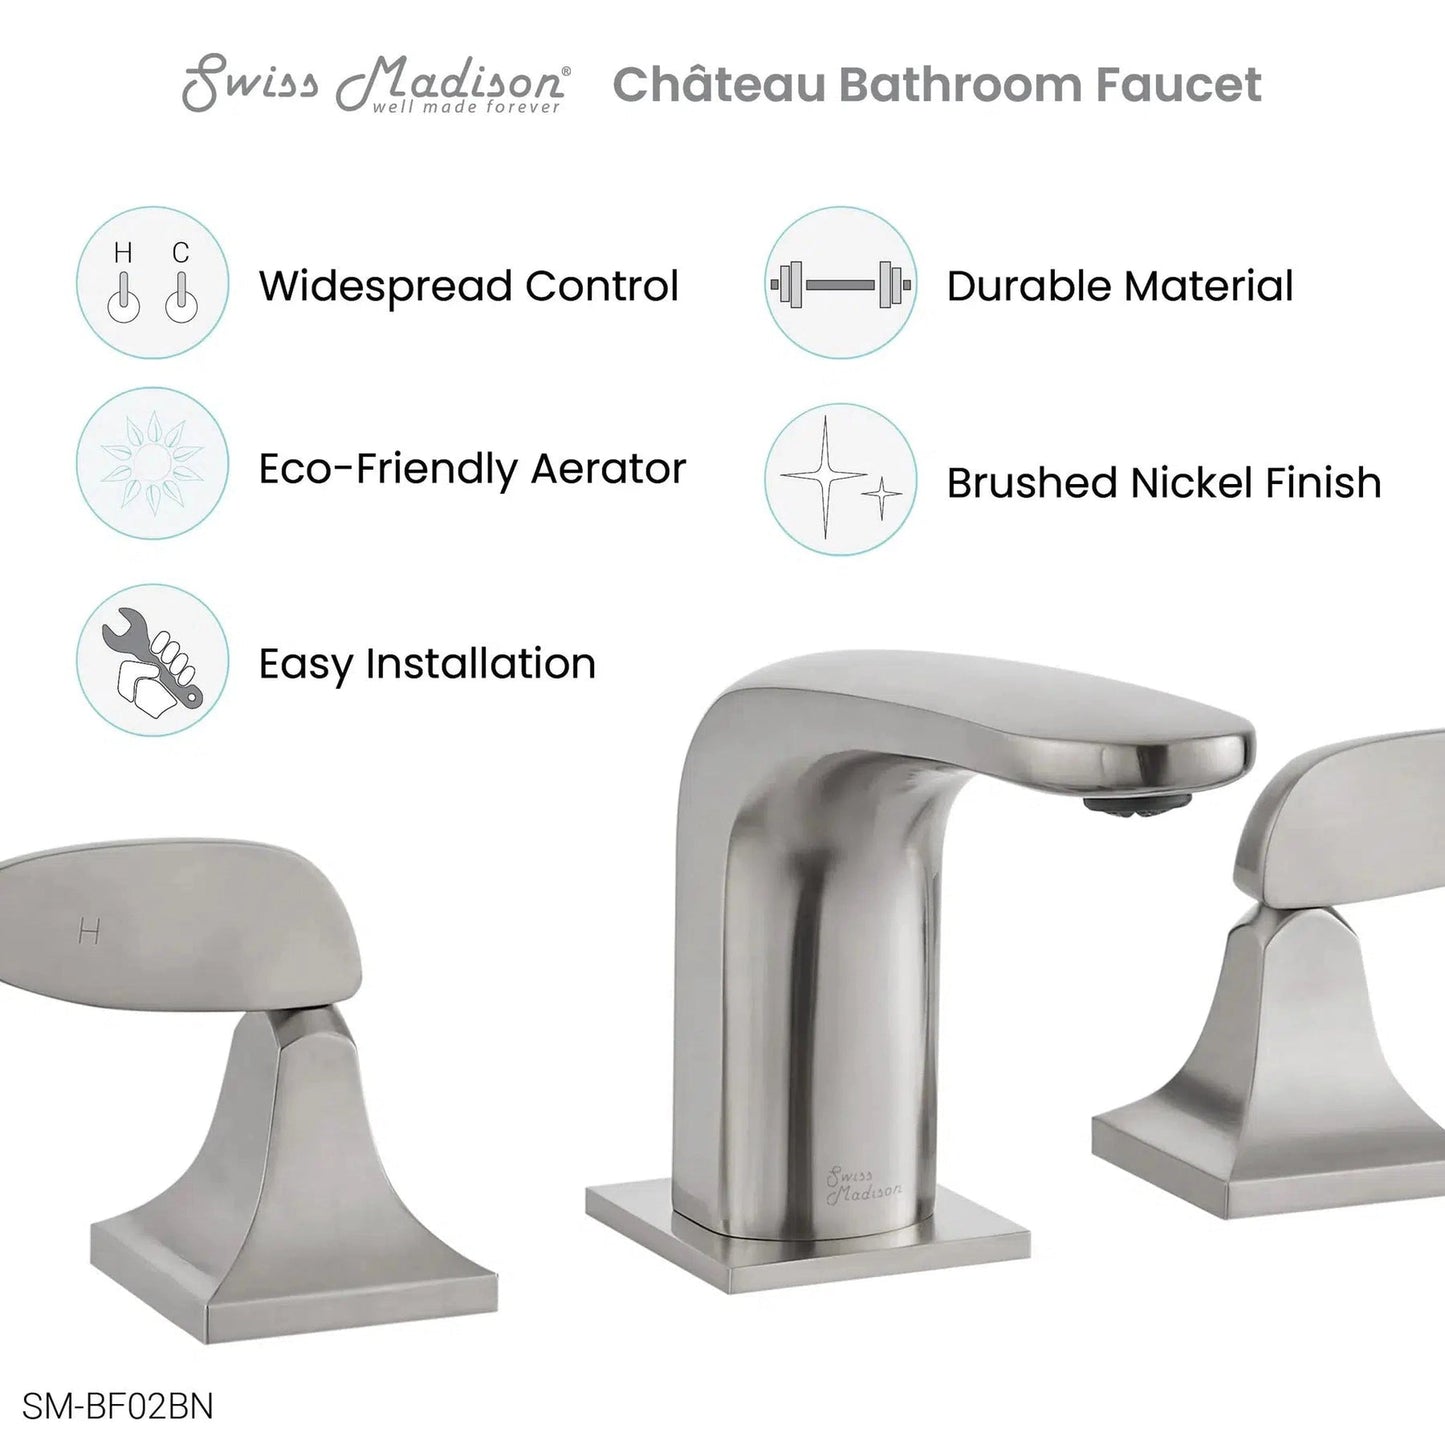 Swiss Madison Château 8" Brushed Nickel Widespread Bathroom Faucet With Flow Rate of 1.2 GPM